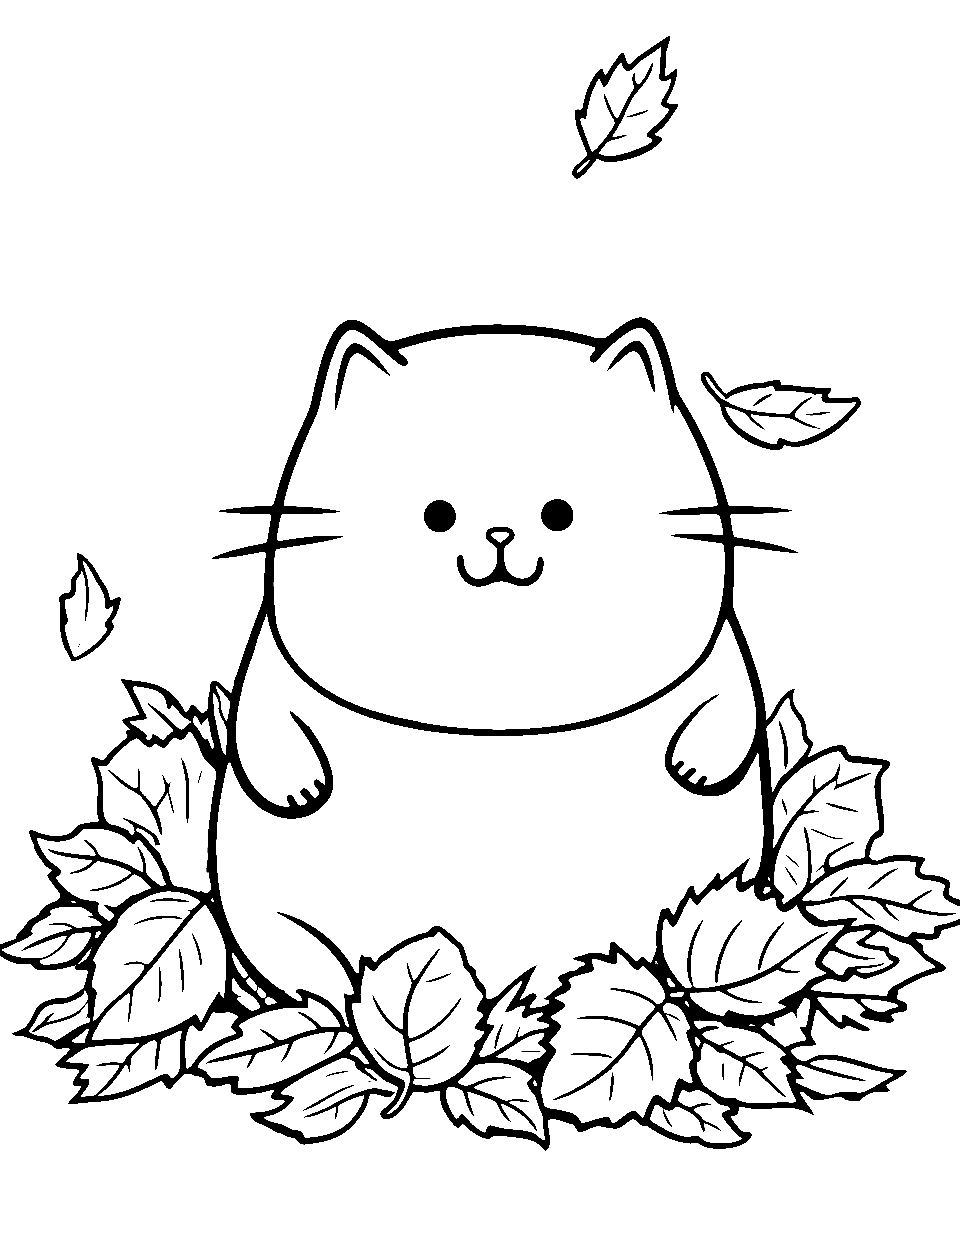 Autumn Leaves Coloring Page - Pusheen playing in a pile of fallen leaves.